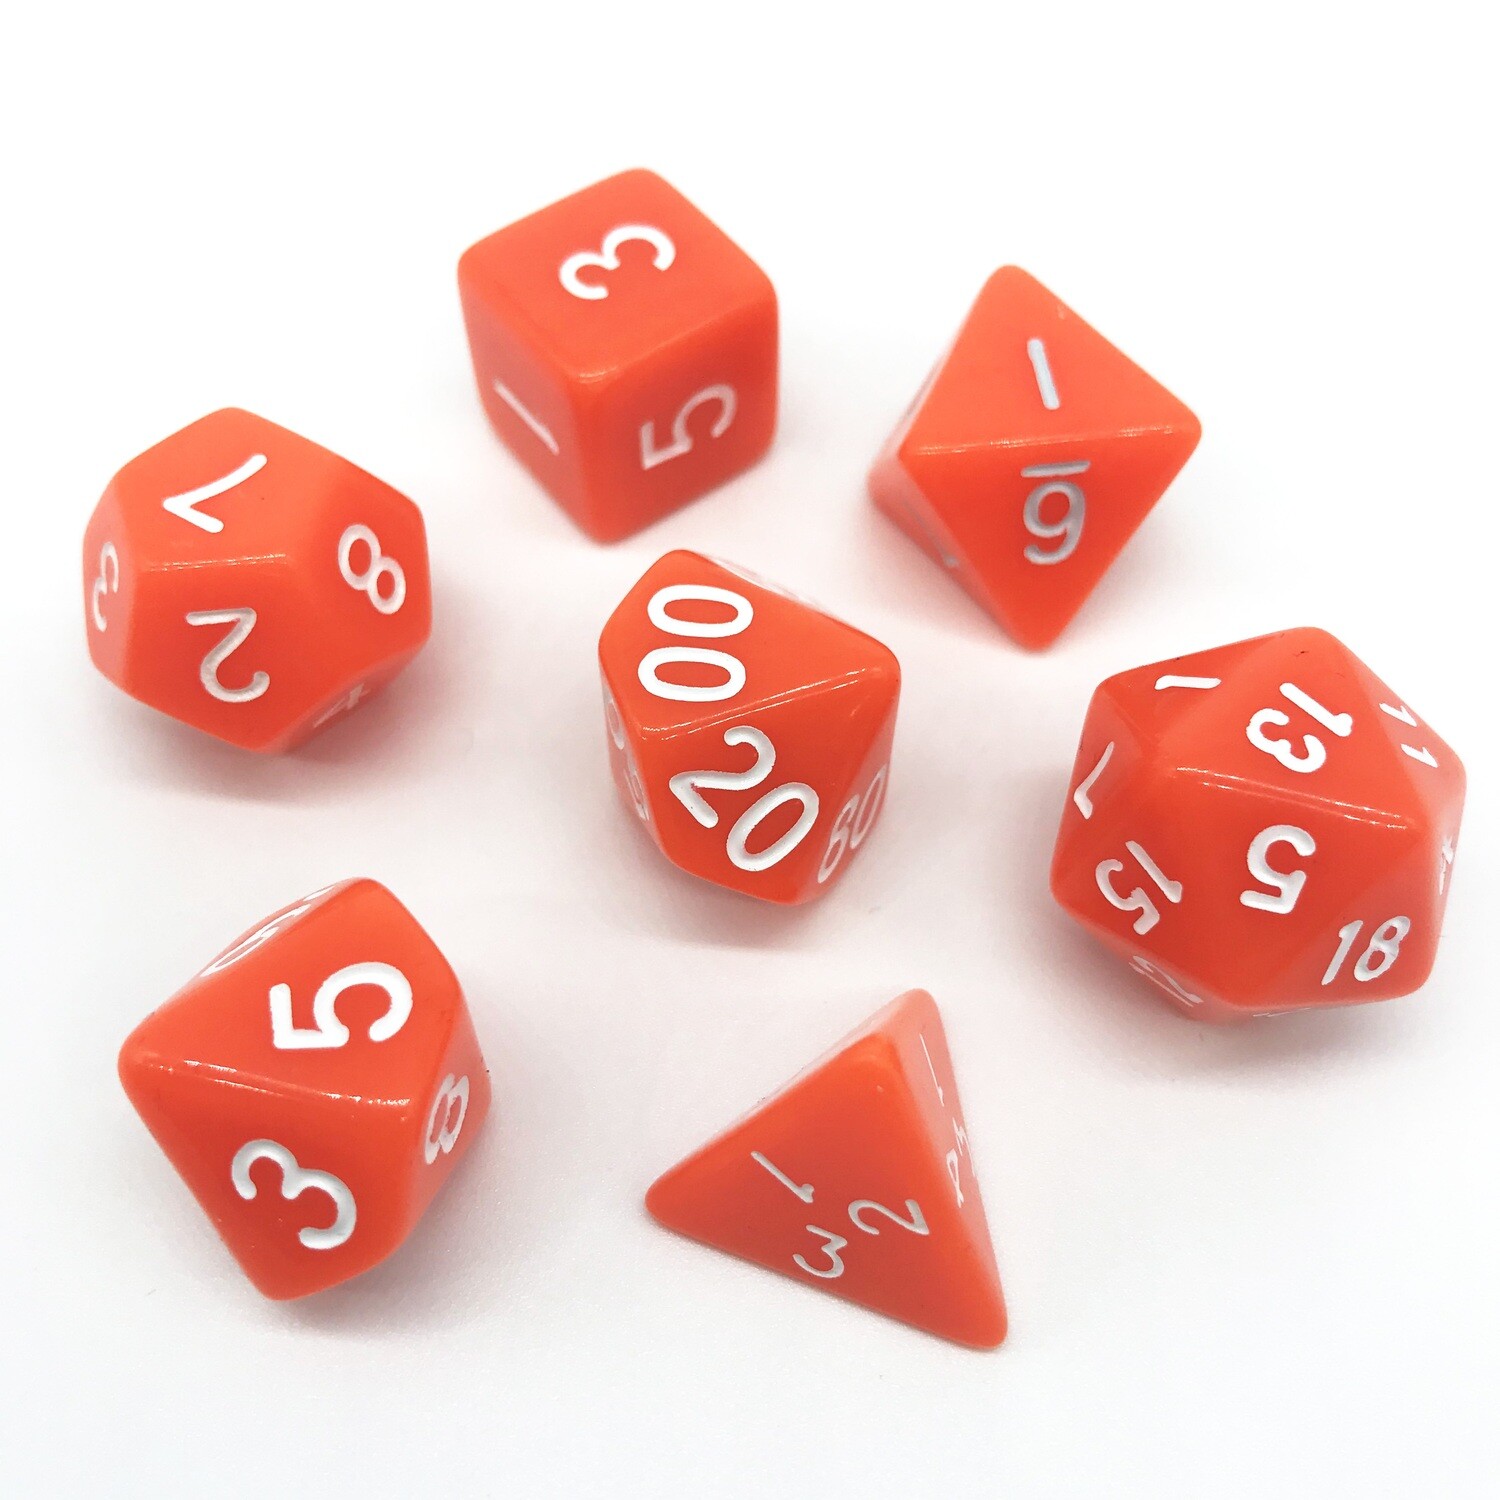 Dice Set - Orange solid with white numbers